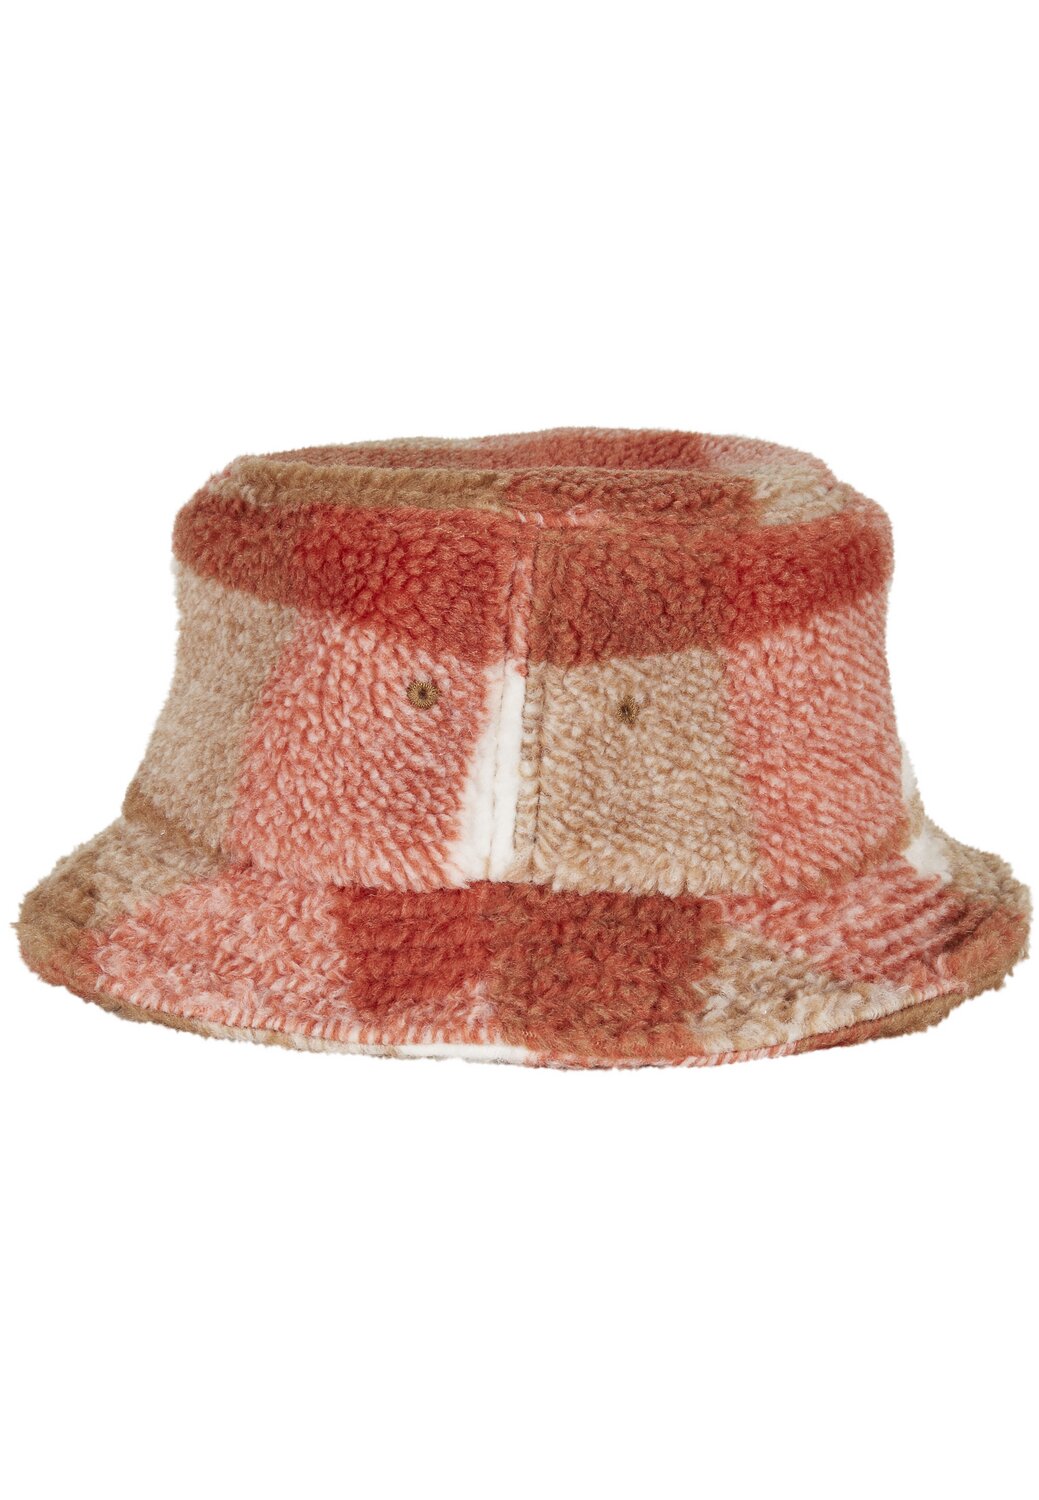 Bucket Hat Sherpa Check Flexfit white/sand/toffee | MAXISCOOT